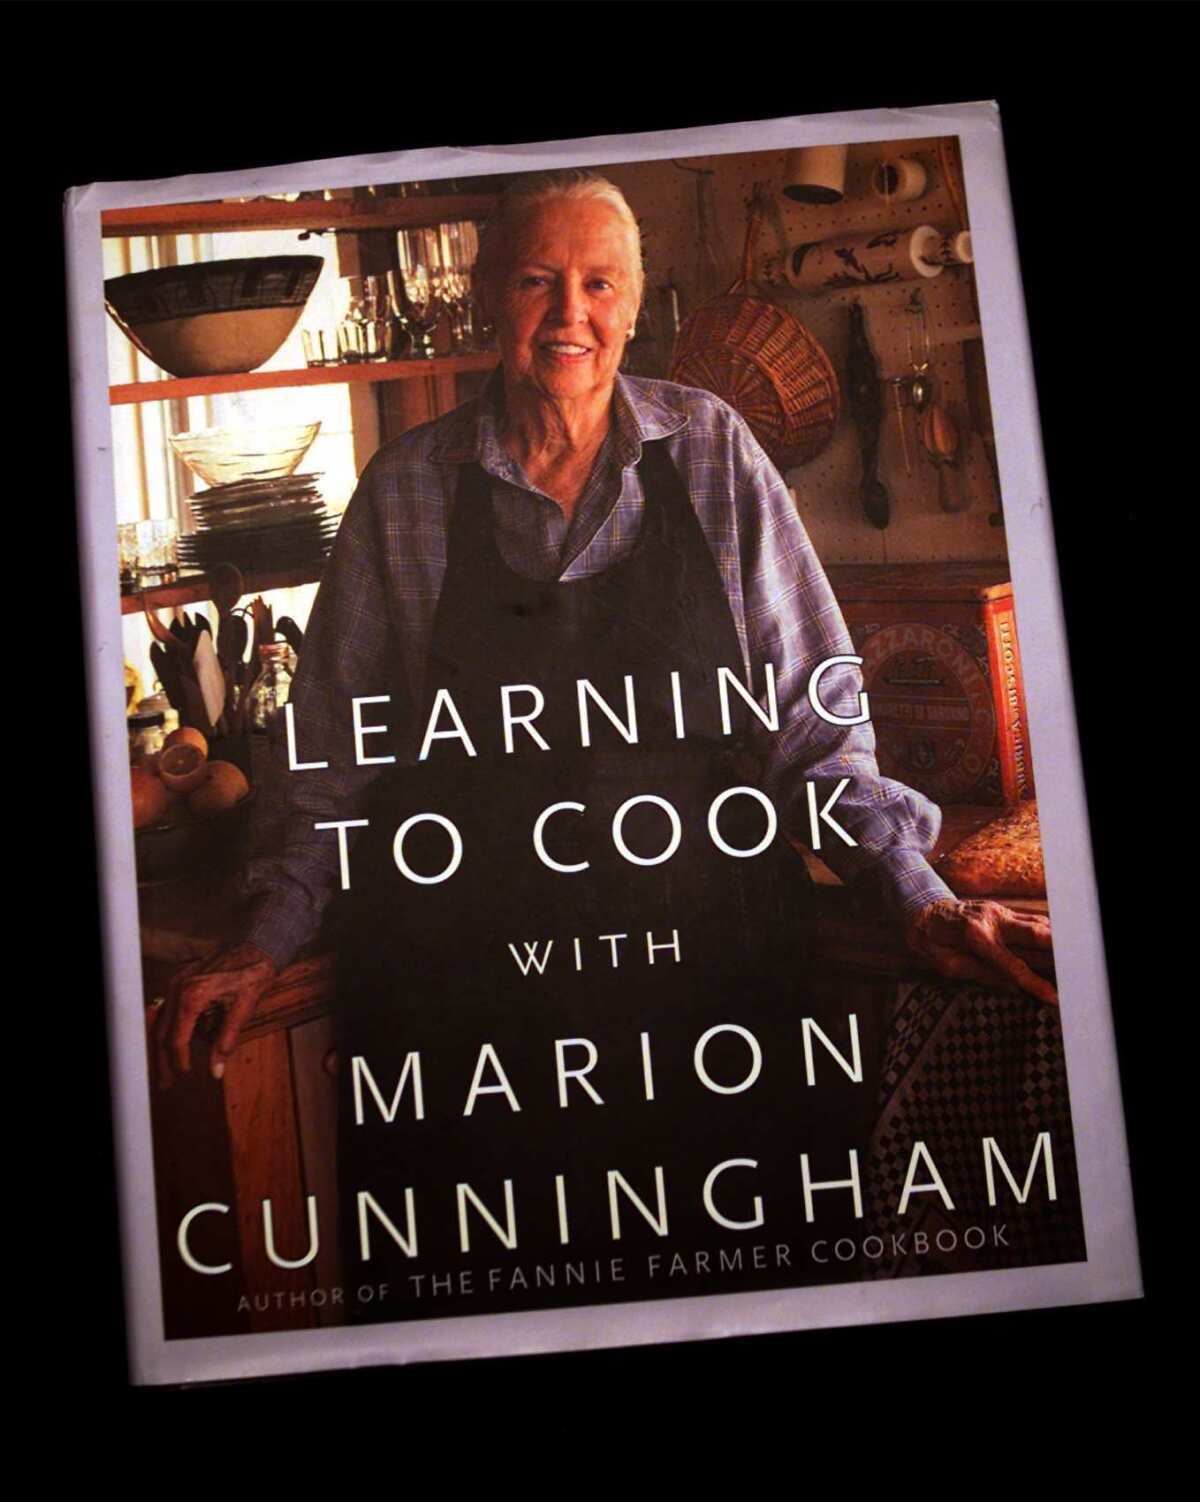 Photo of the book "Learning to Cook with Marion Cunningham."